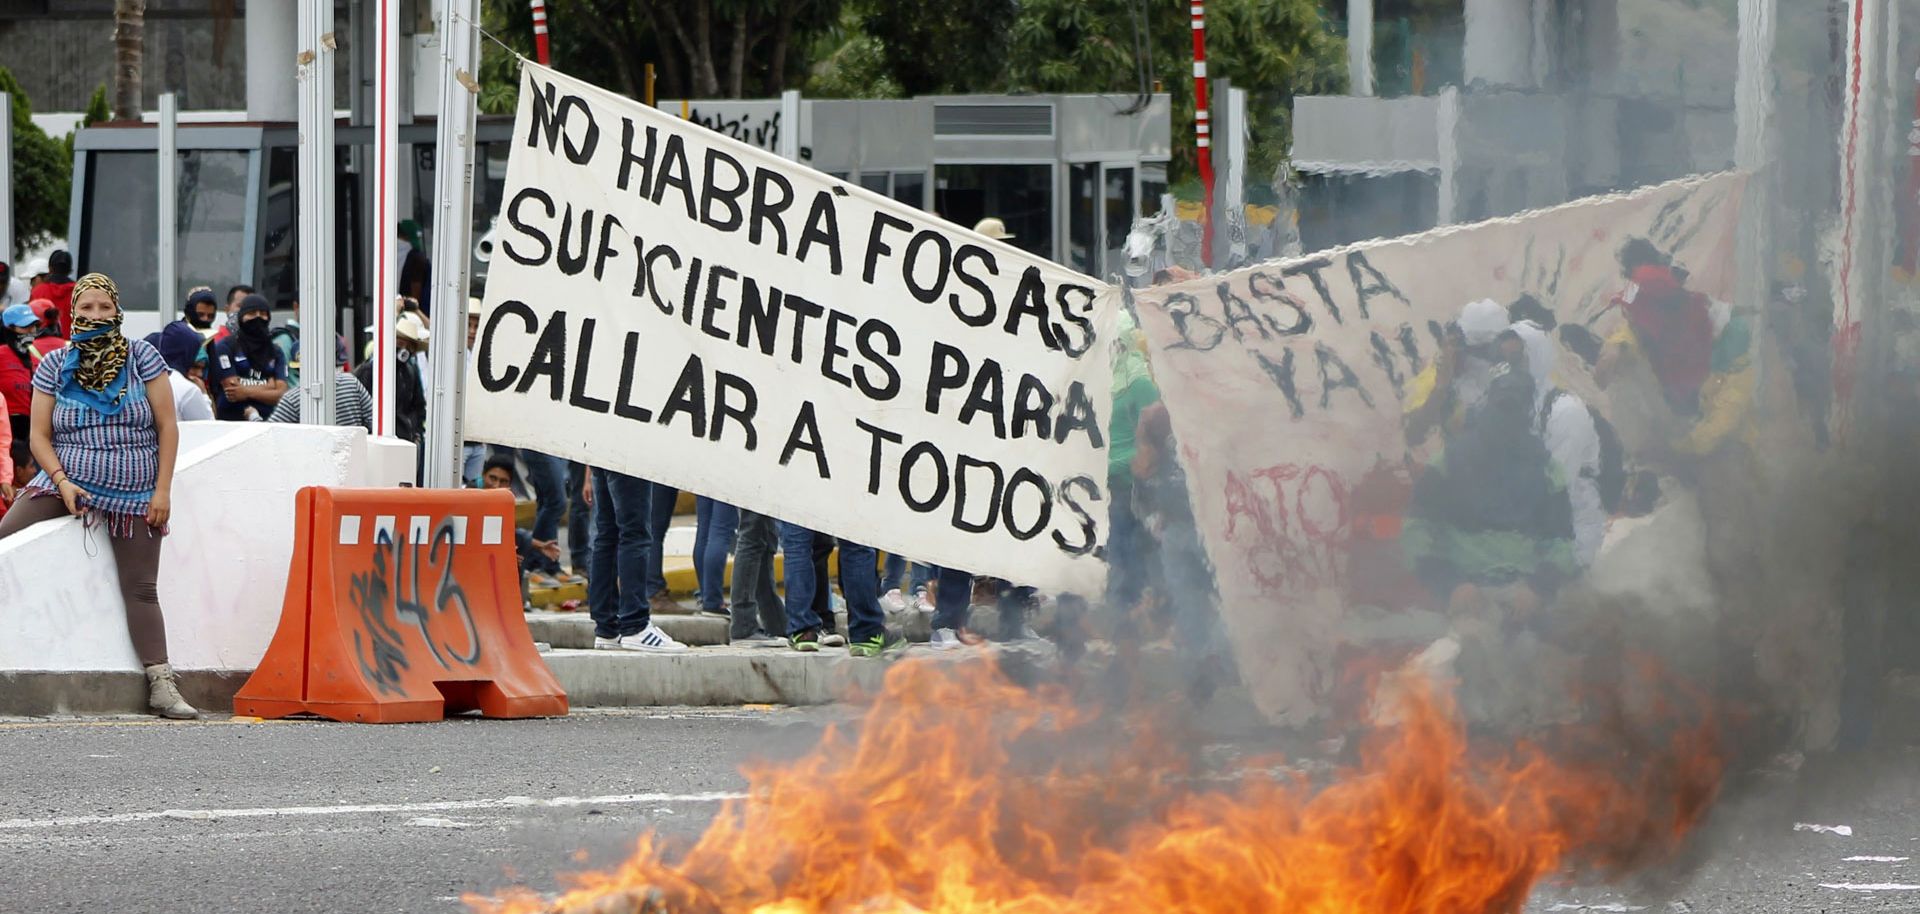 Ahead of Legislative Elections, Protests in Mexico Turn Violent